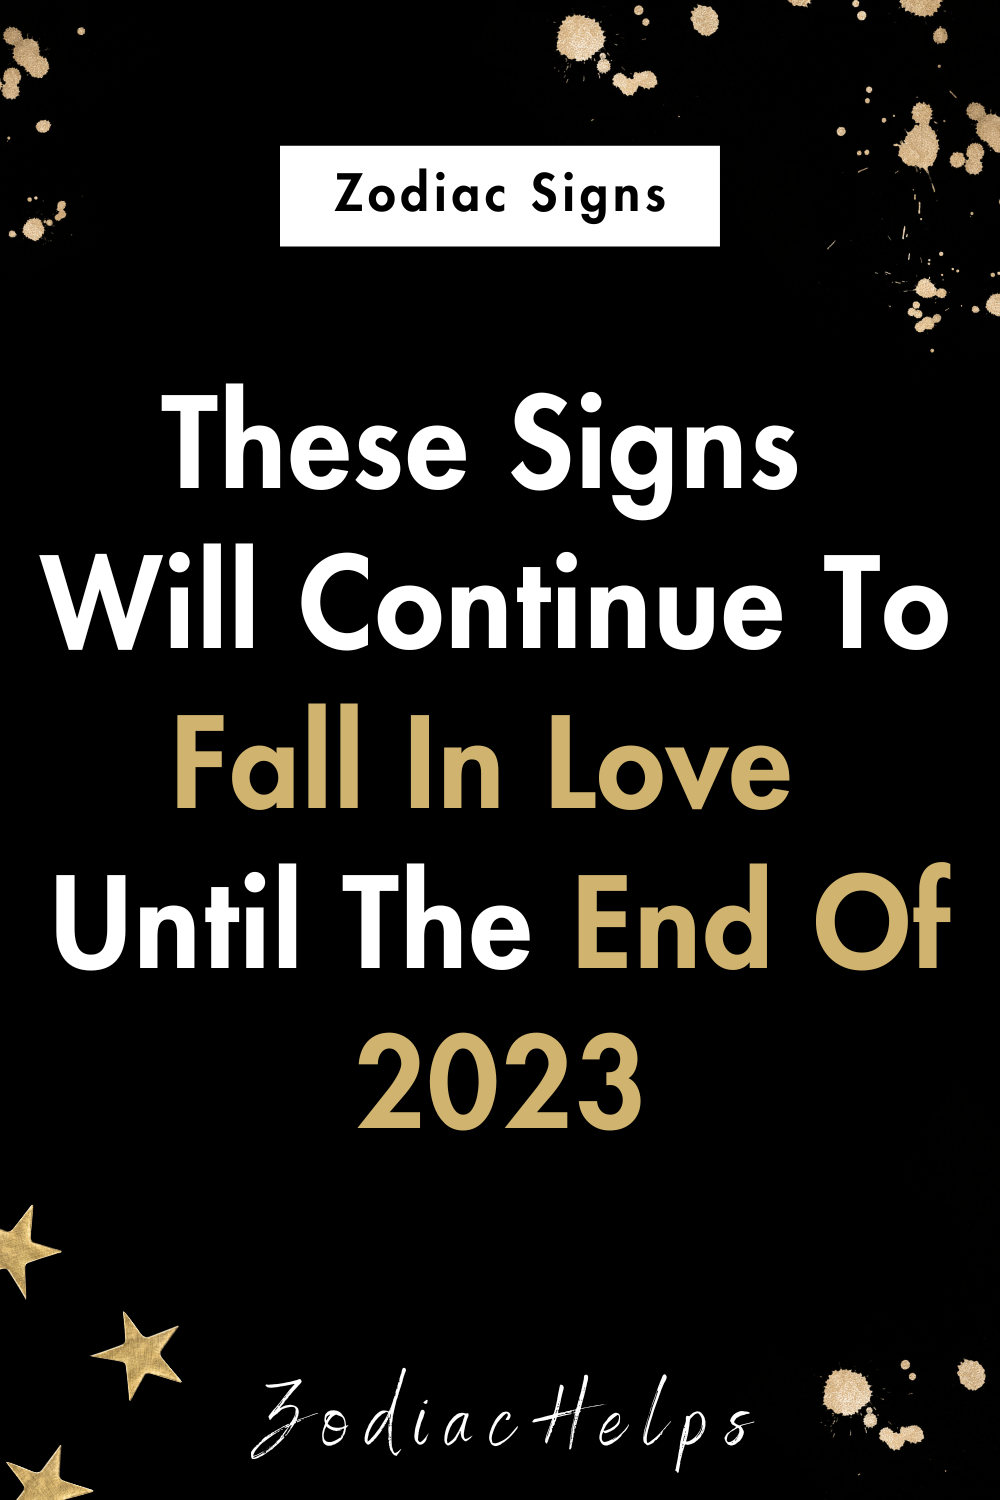 These Signs Will Continue To Fall In Love Until The End Of 2023